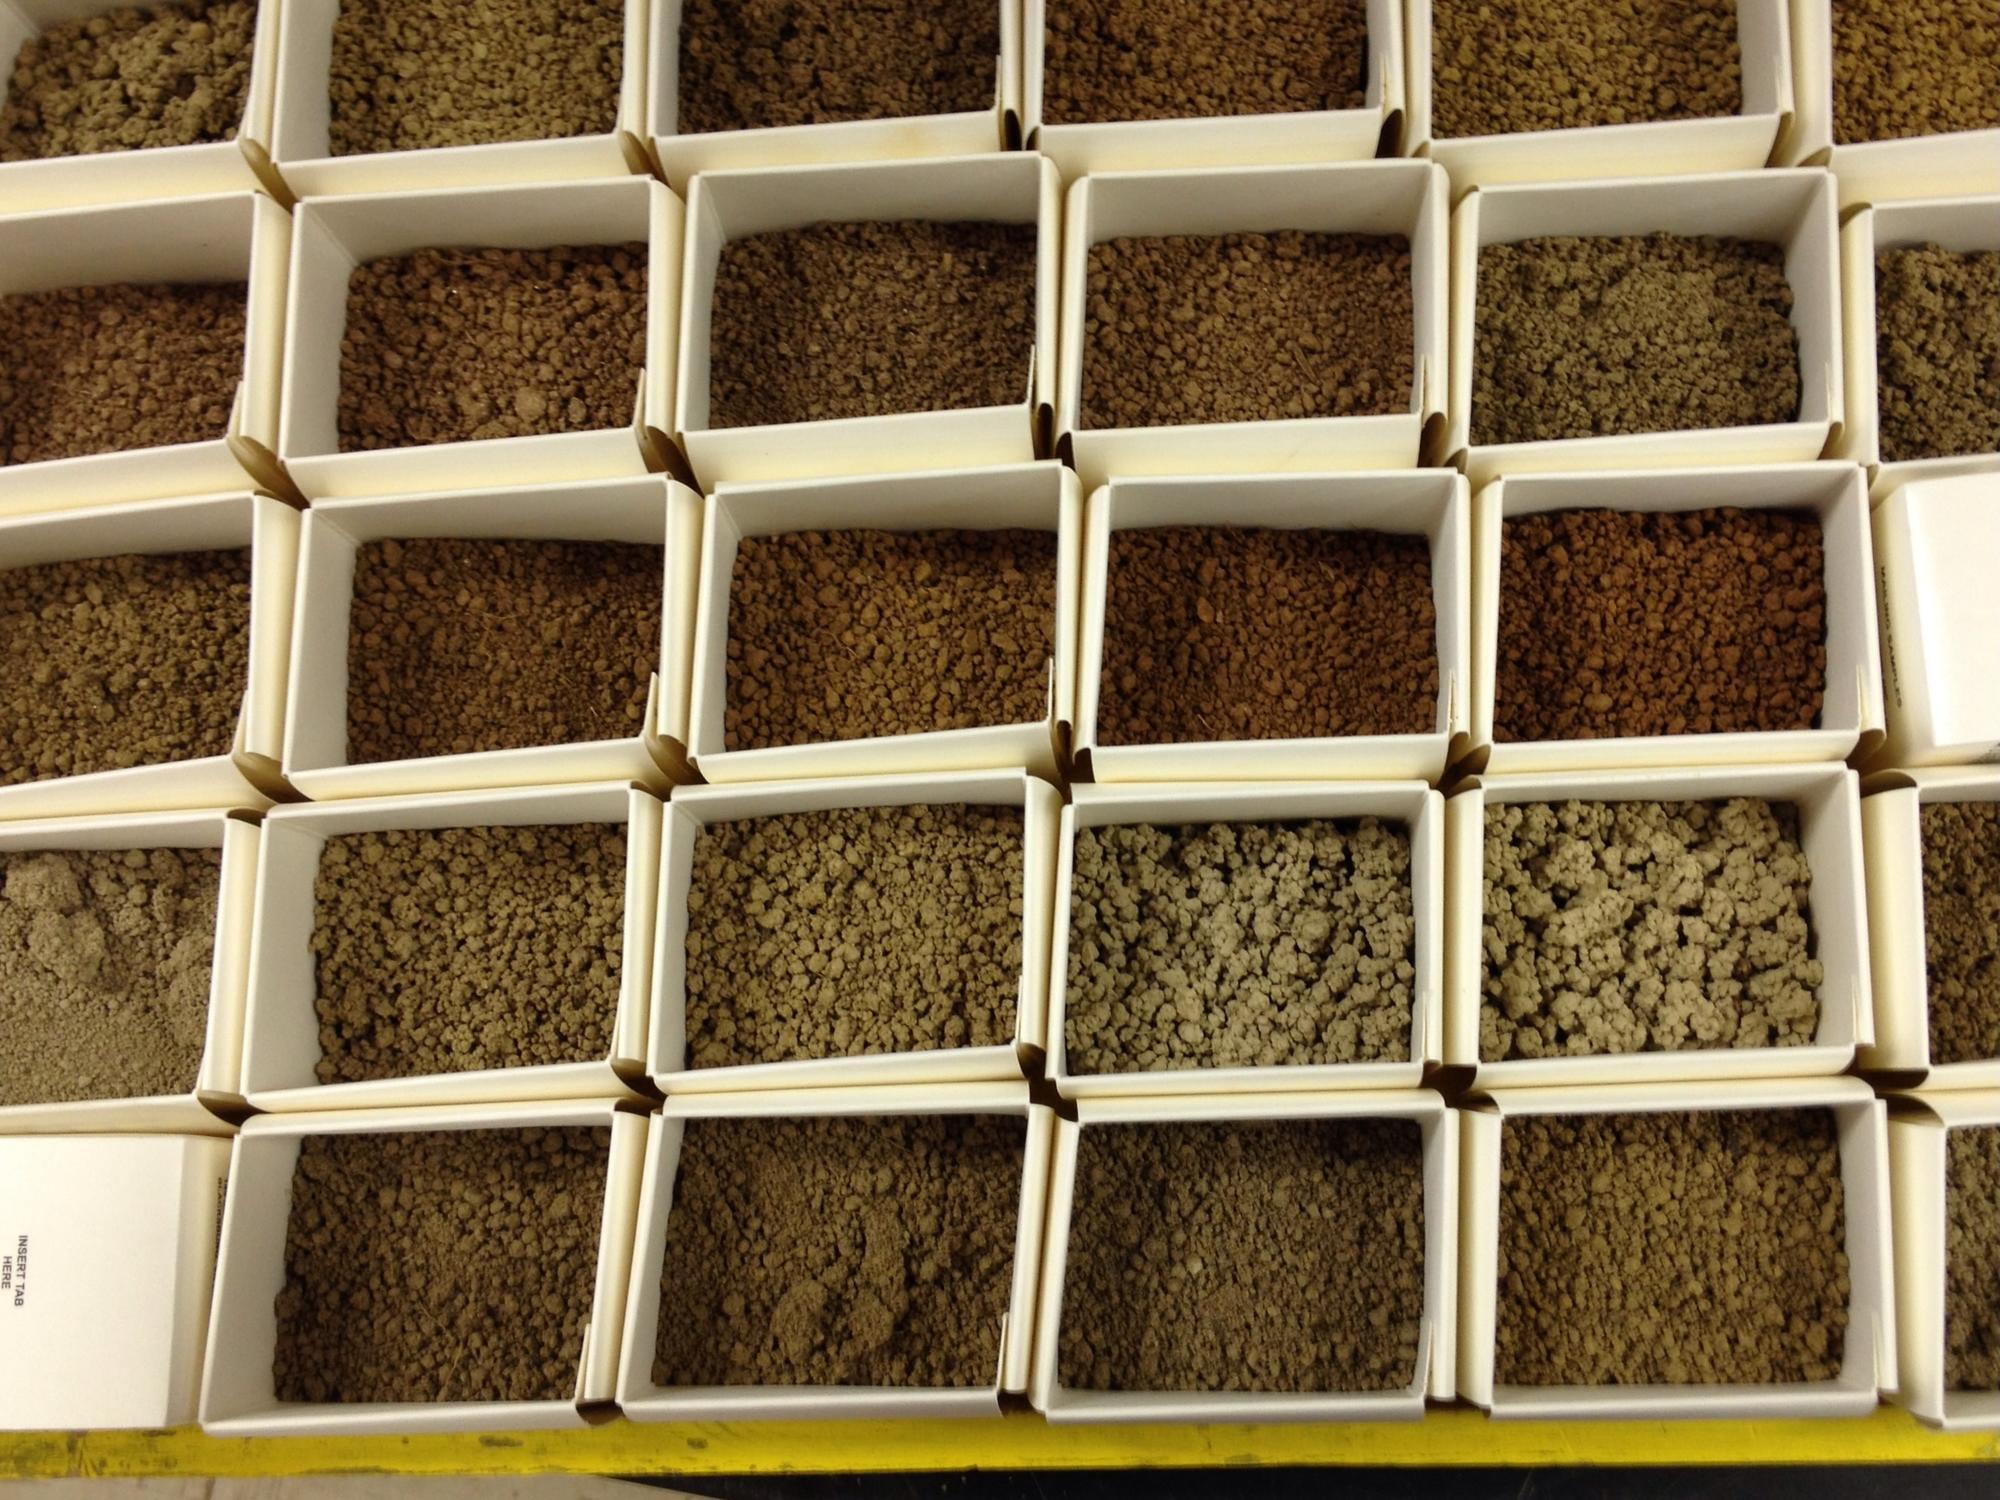 Boxes of soil samples arranged in a grid